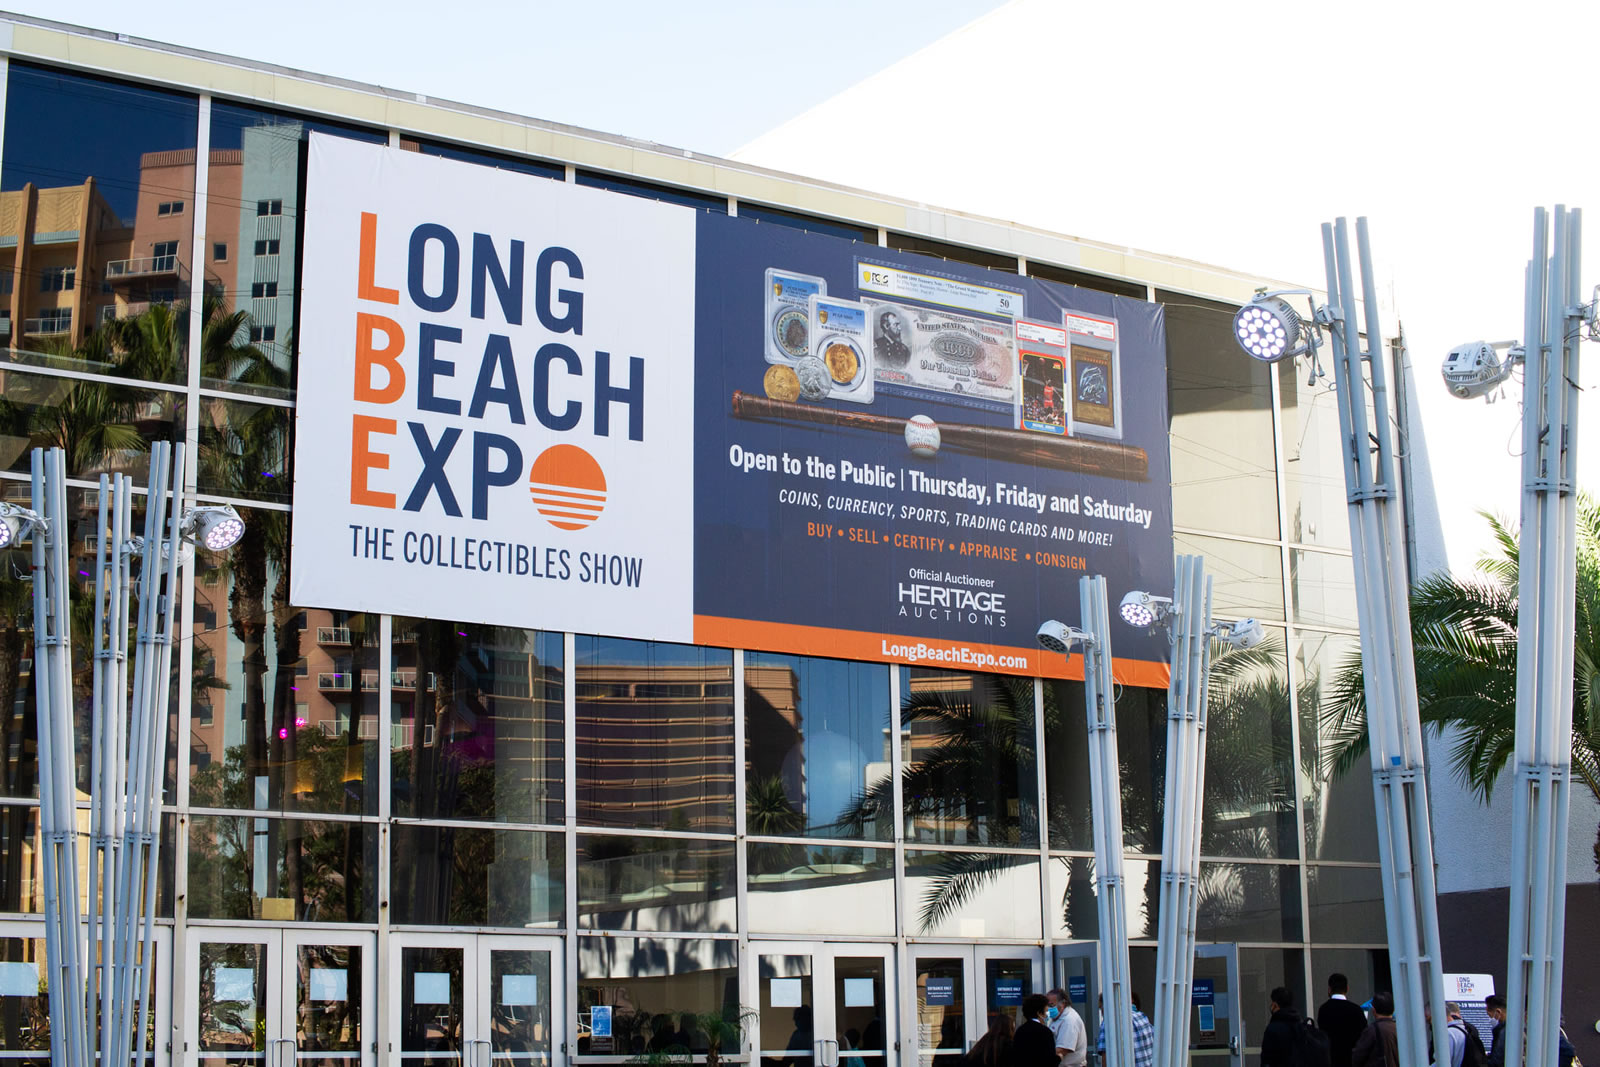 Long Beach Expo Attractions from June 30 through July 2 CoinNews